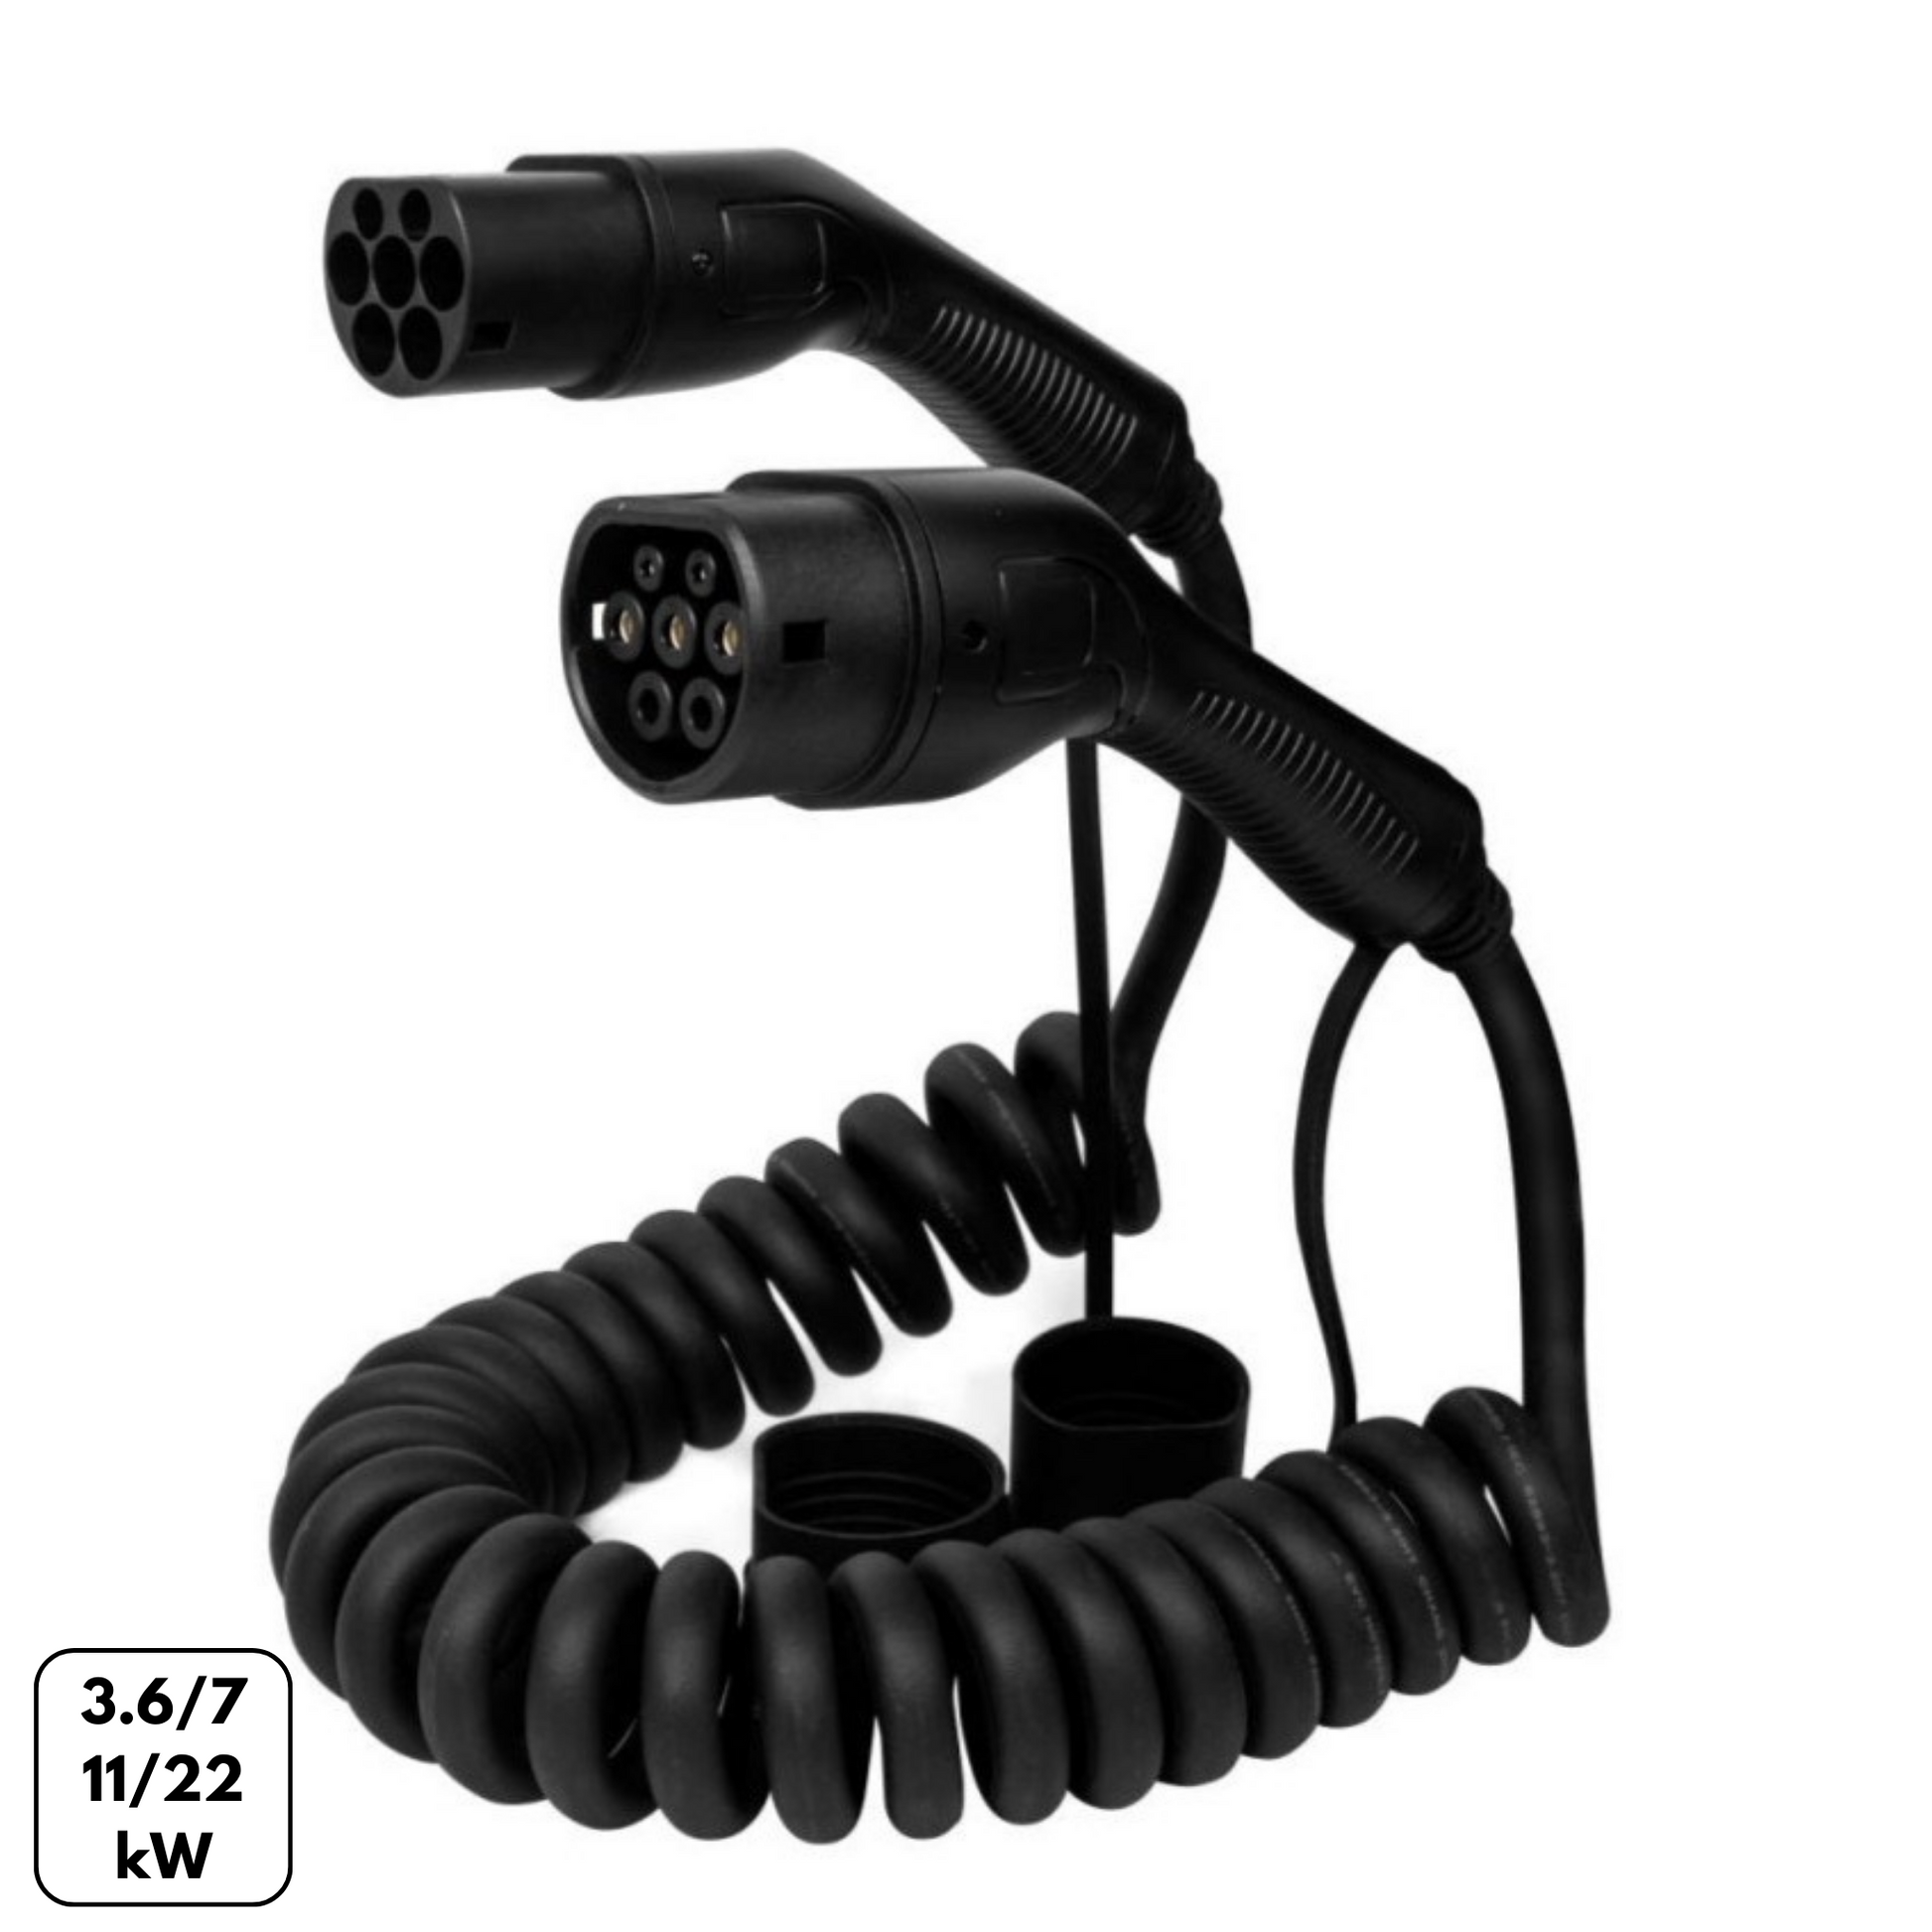 Premium coiled EV charging cable for your electric car with type 2